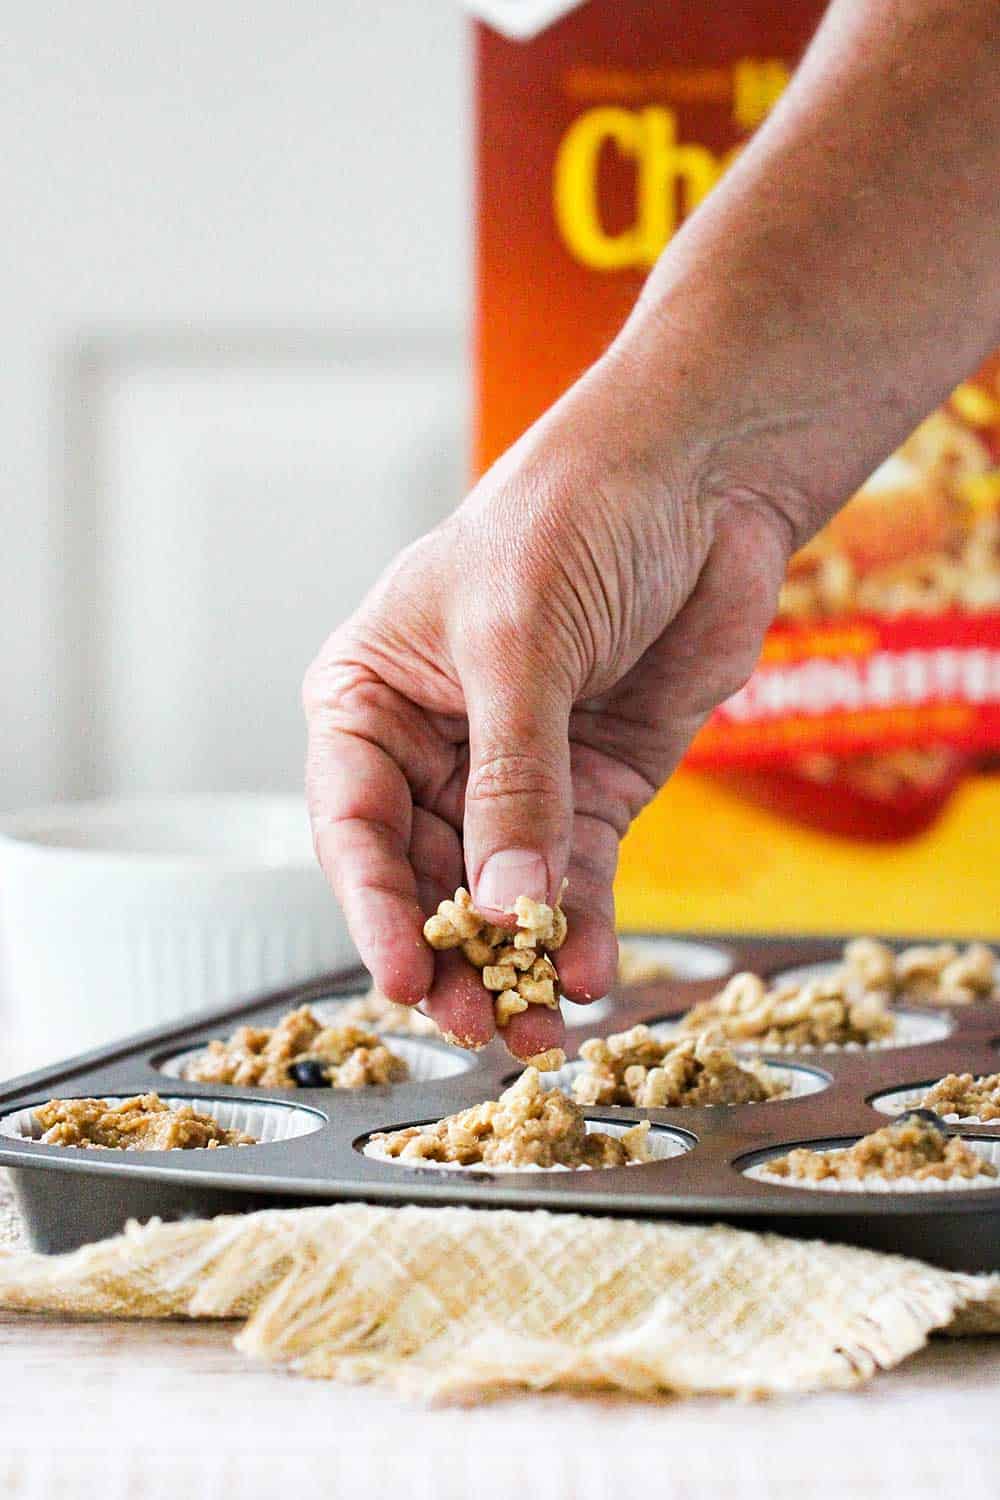 Sprinkle roughly chopped Honey Nut Cheerios on top of the banana blueberry muffins.